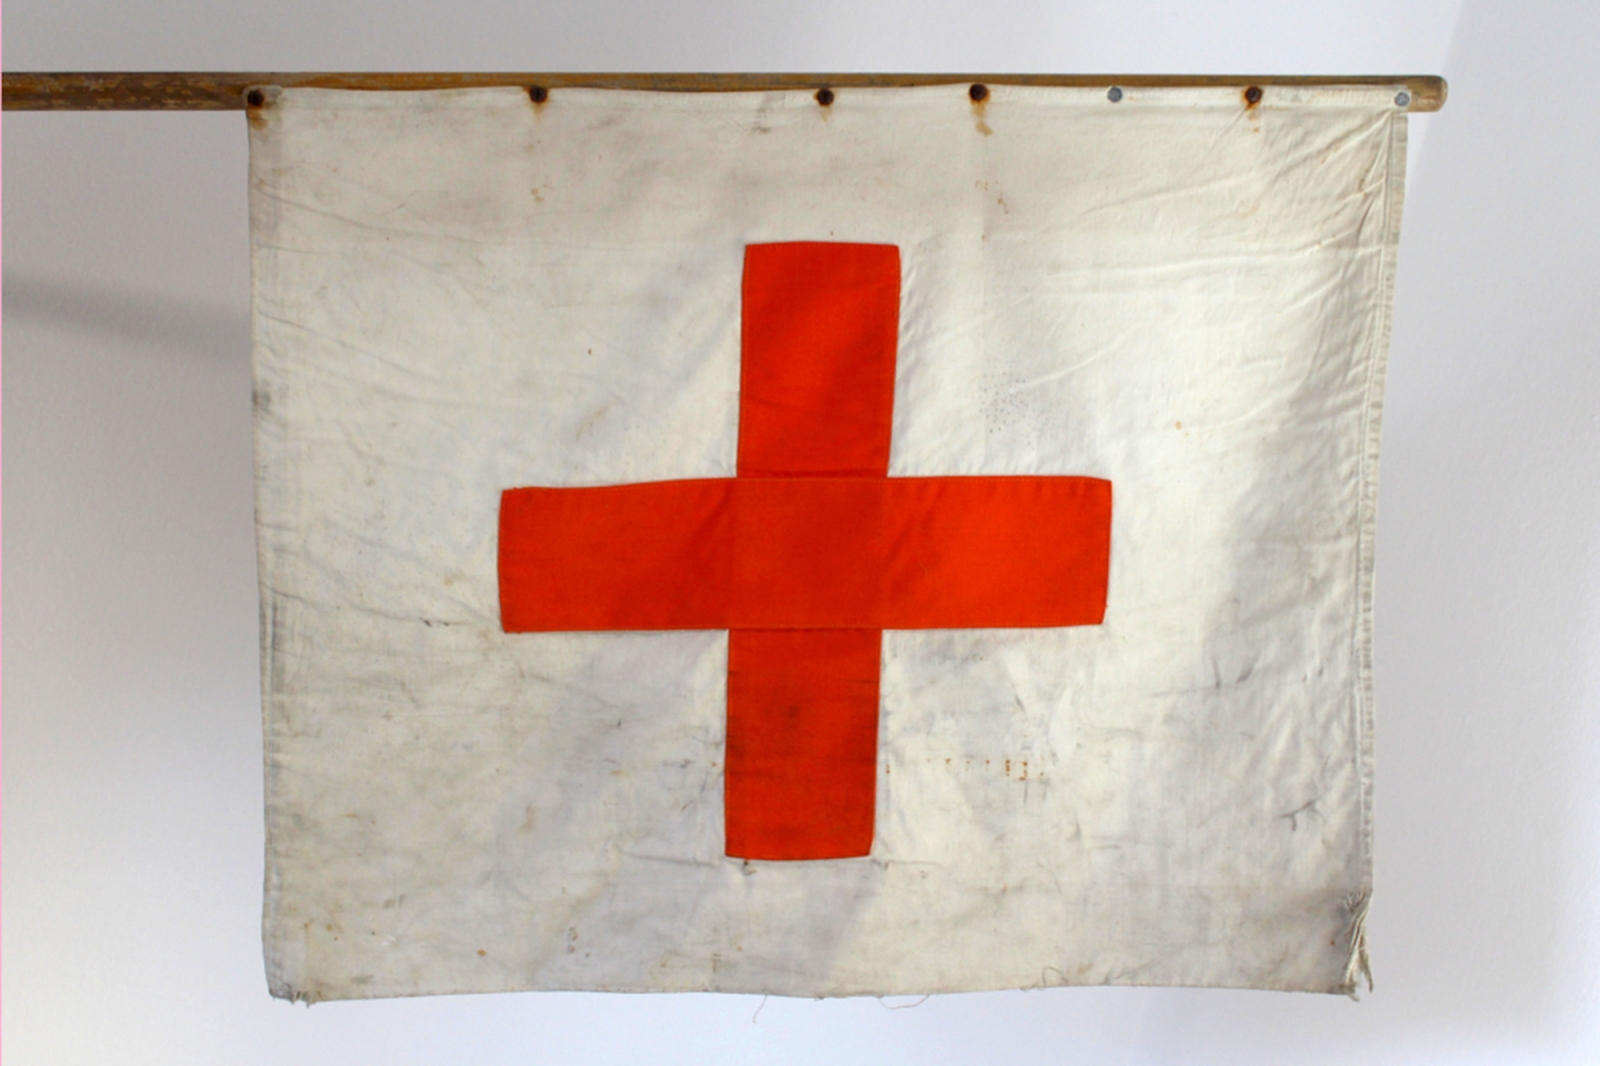 A flag with a red cross